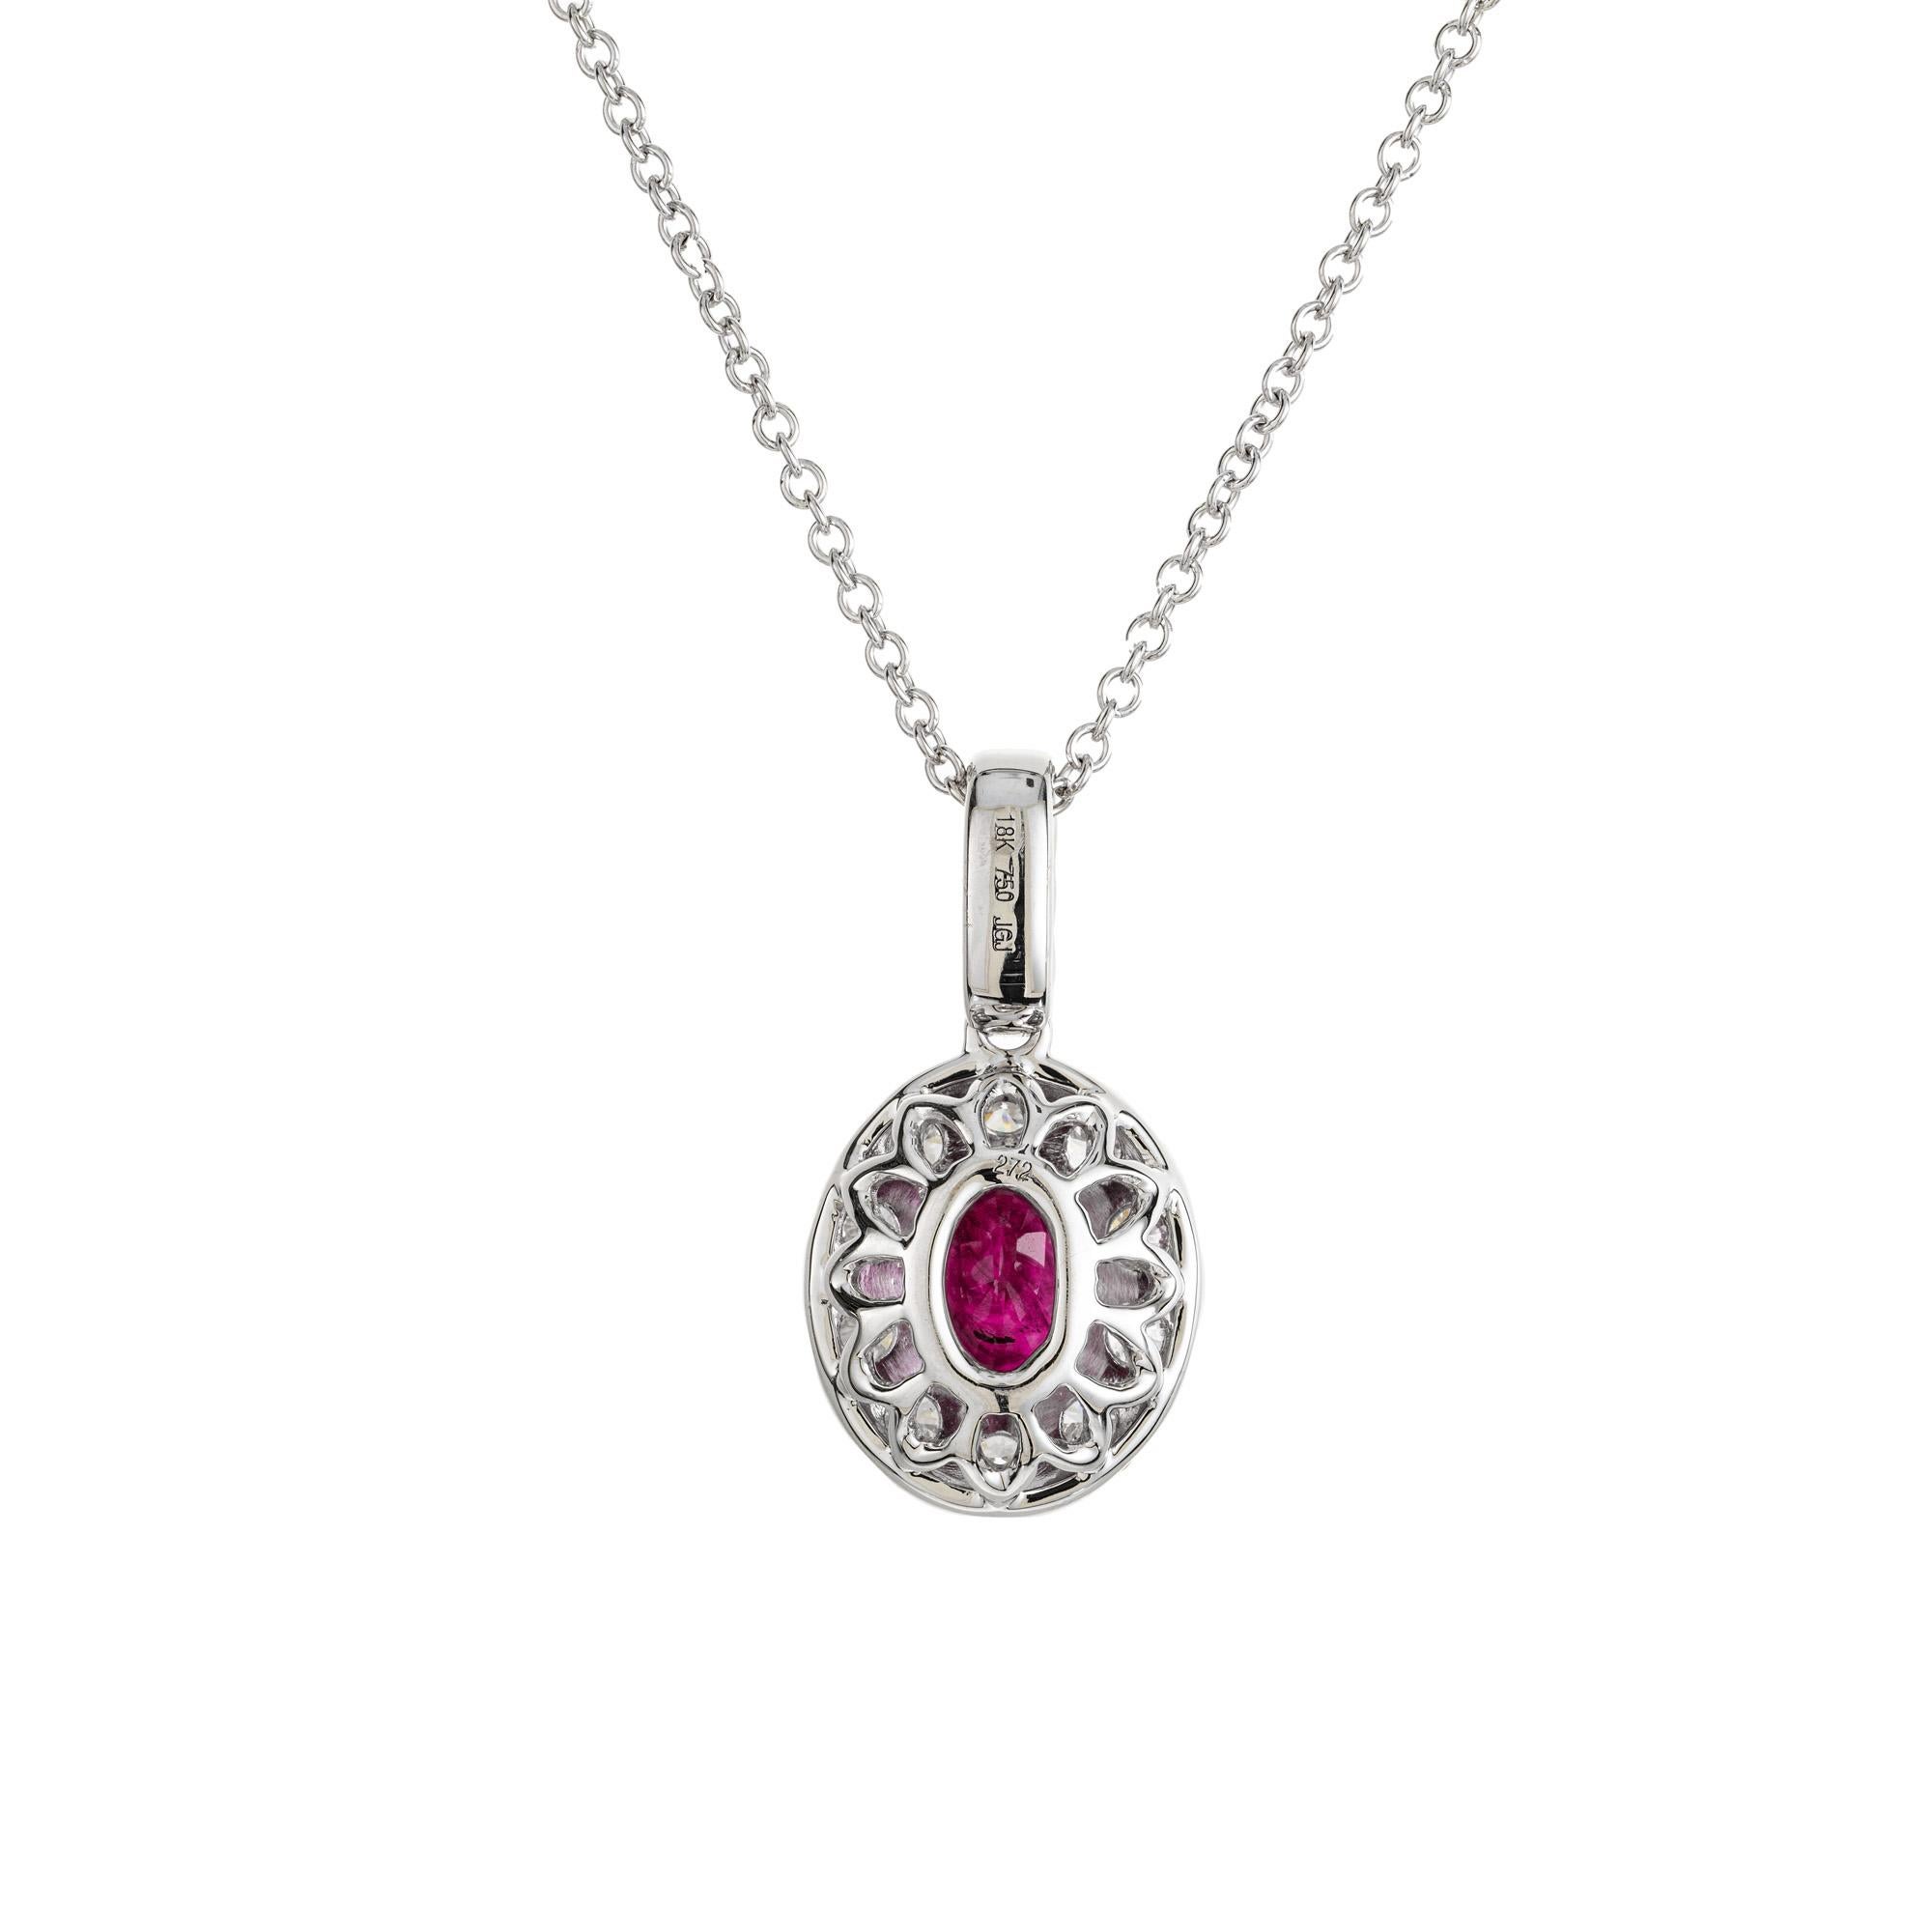 Women's Peter Suchy GIA Certified 1.32 Carat Ruby Diamond White Gold Pendant Necklace For Sale